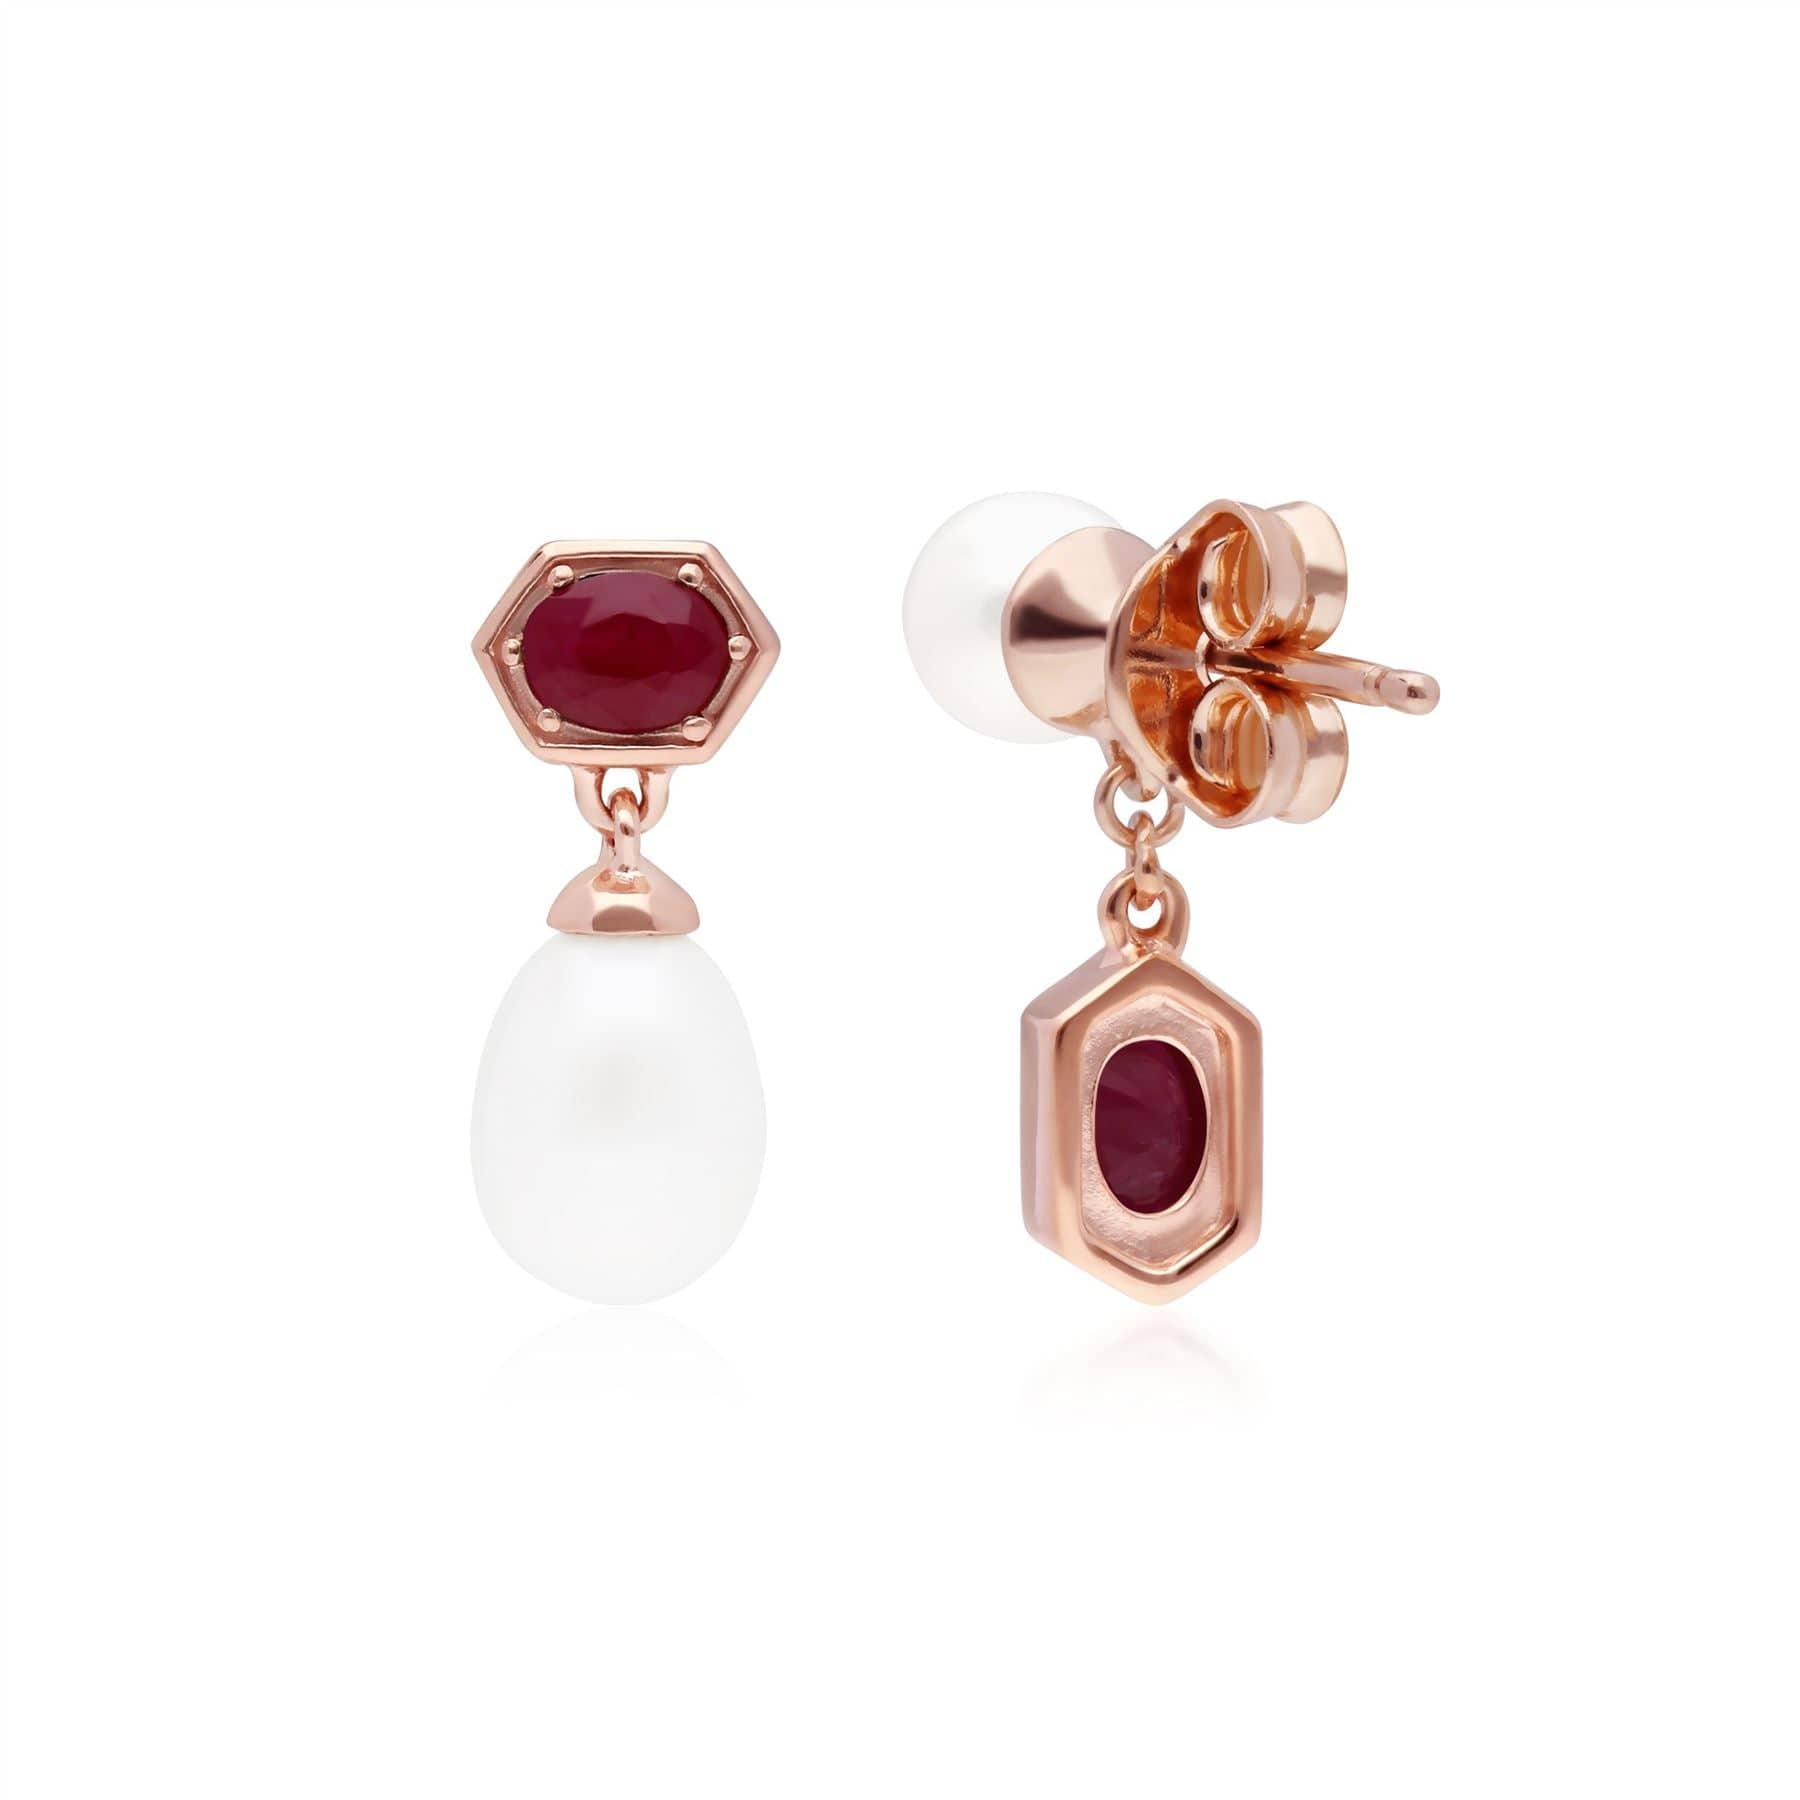 Modern Pearl & Ruby Mismatched Drop Earrings in Rose Gold Plated Silver - Gemondo